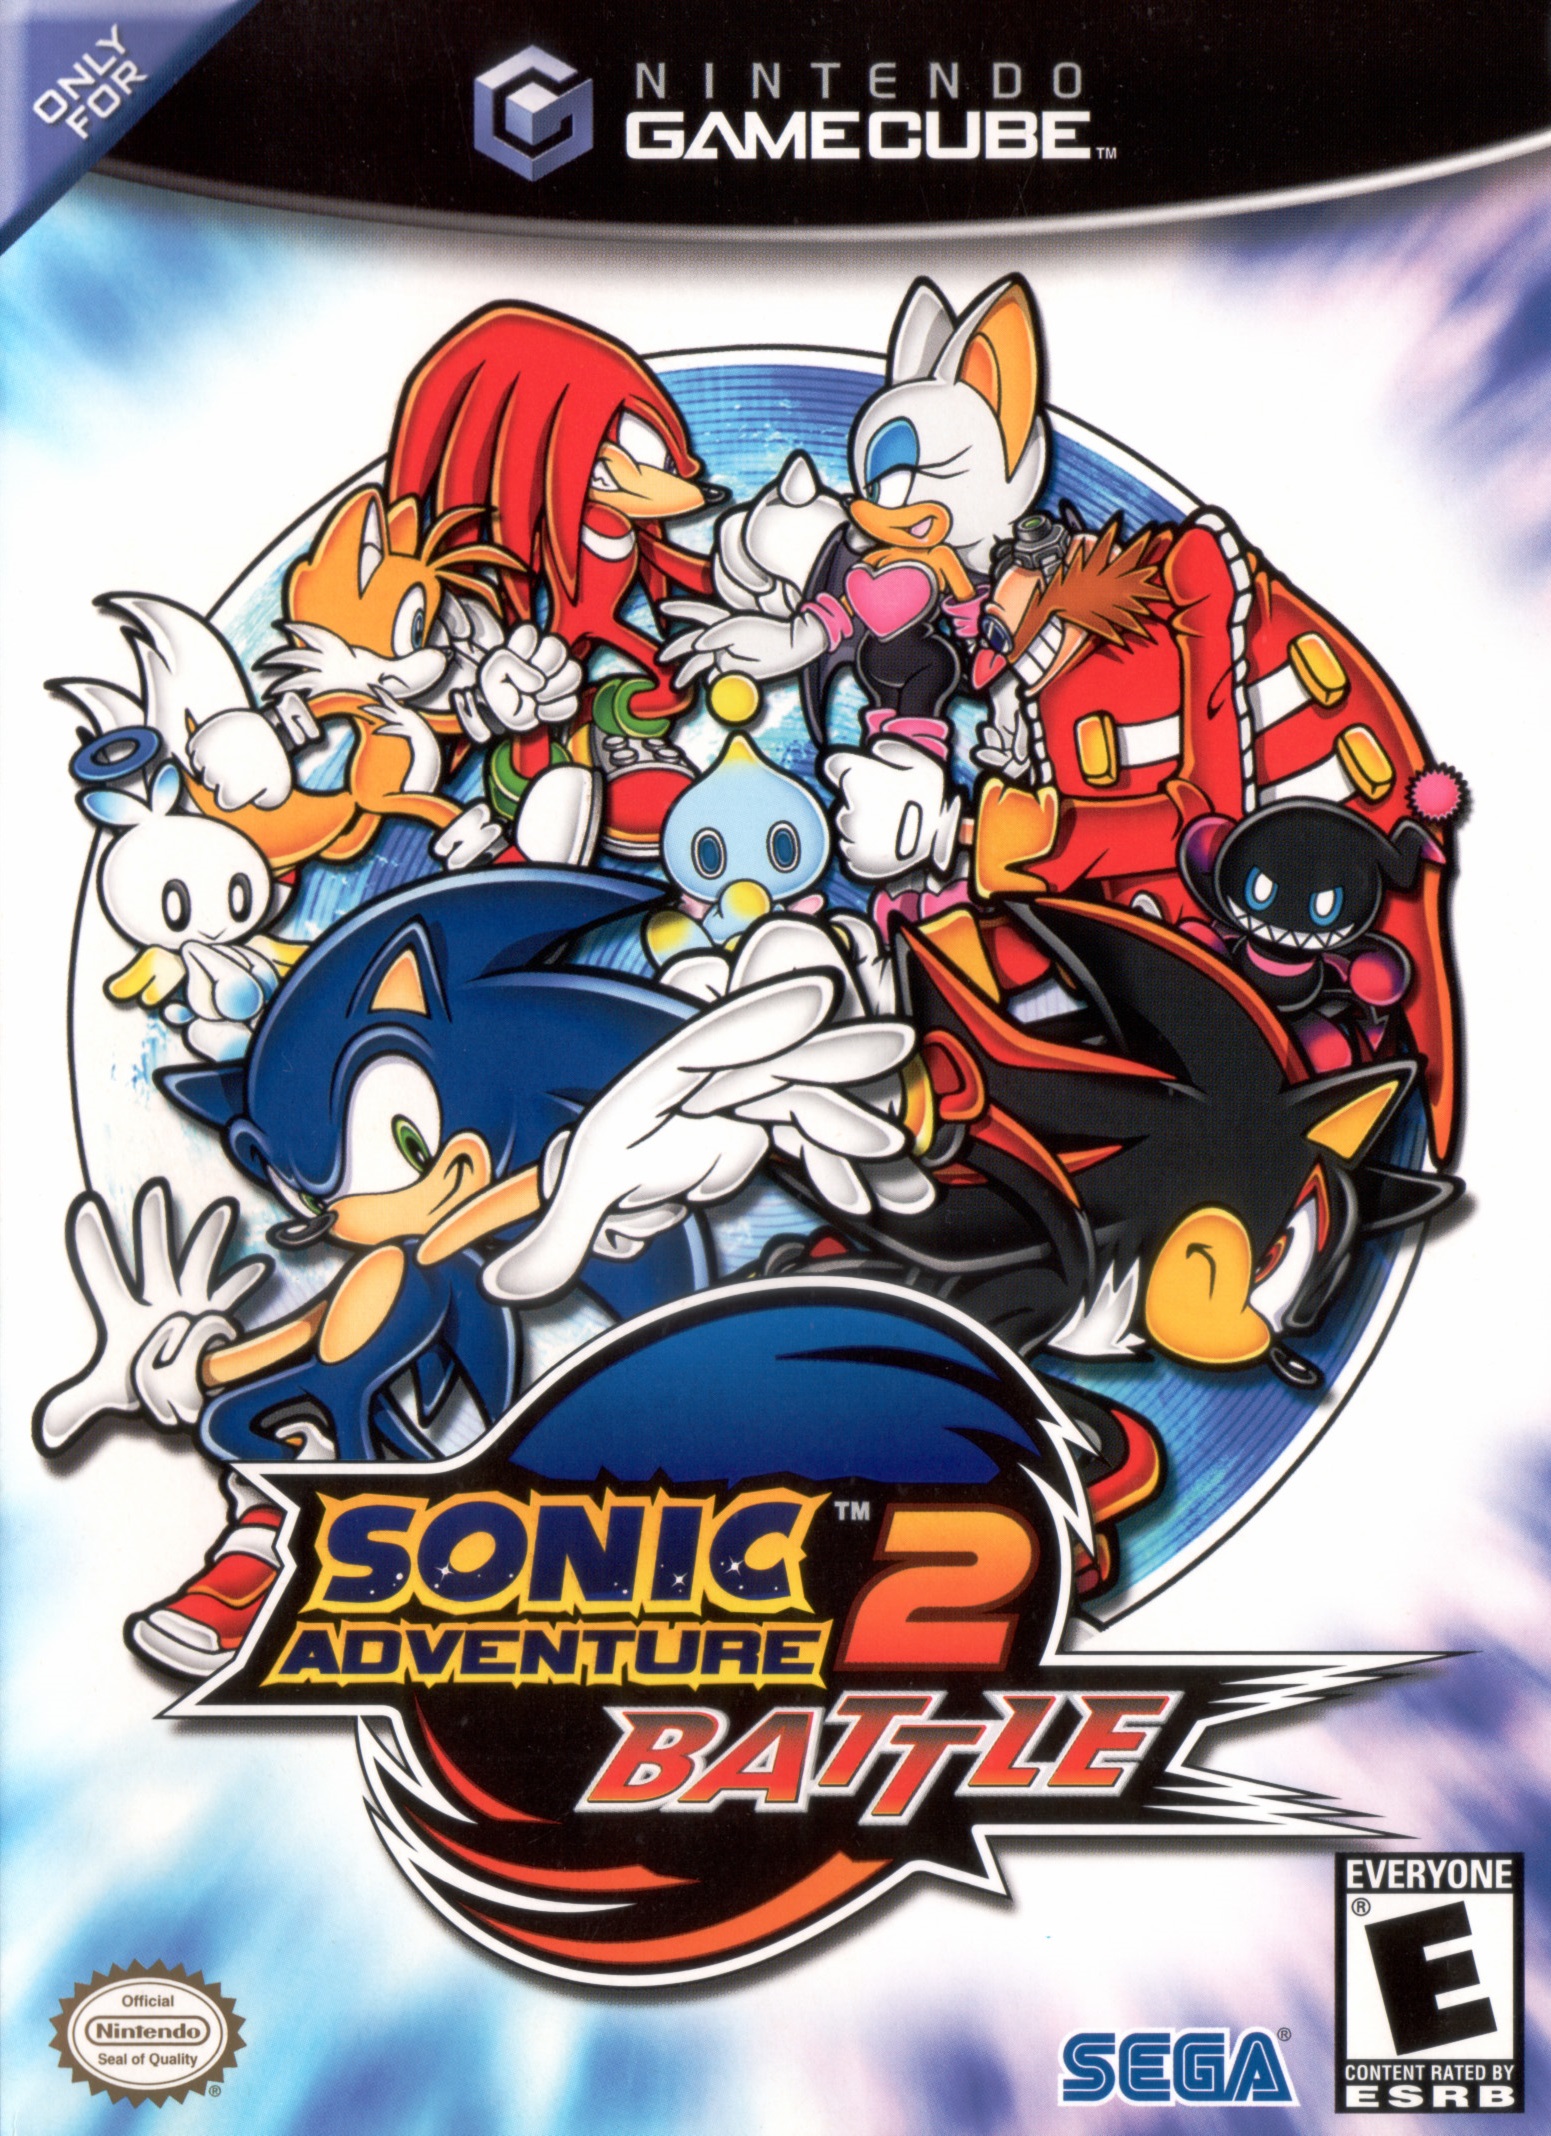 where is switch number 3 in sonic adventure 2